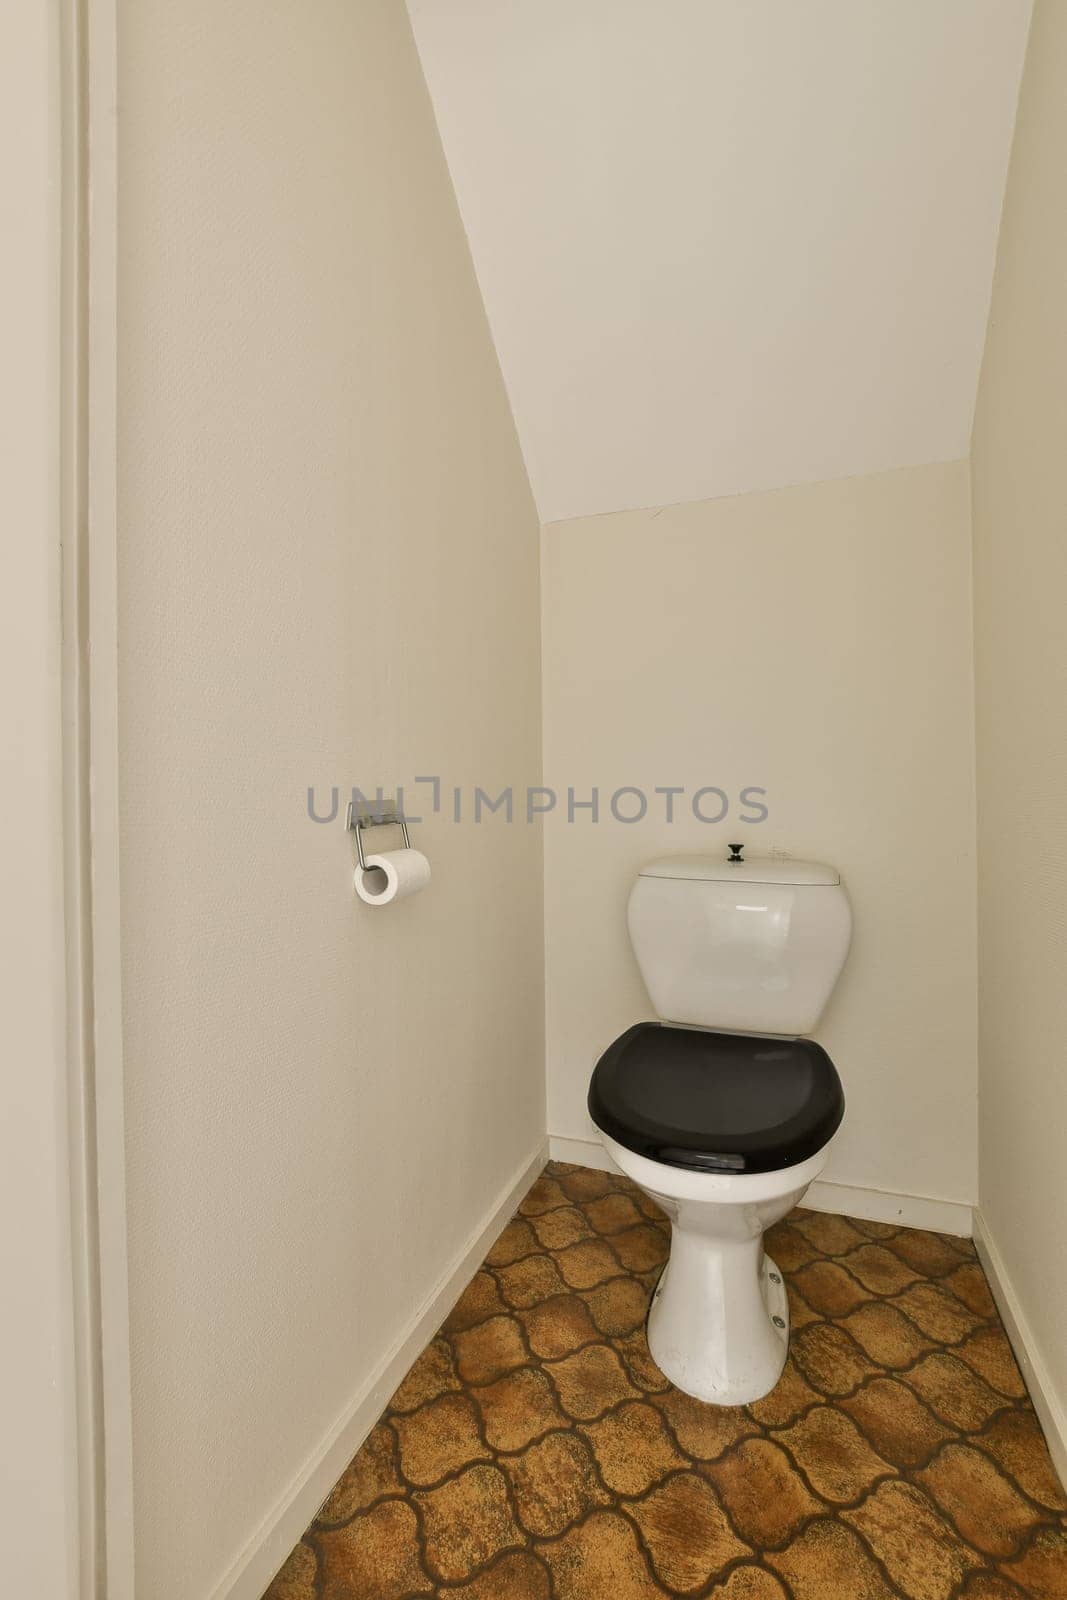 a toilet in the corner of a room with an interesting pattern on the floor, and a white wall behind it